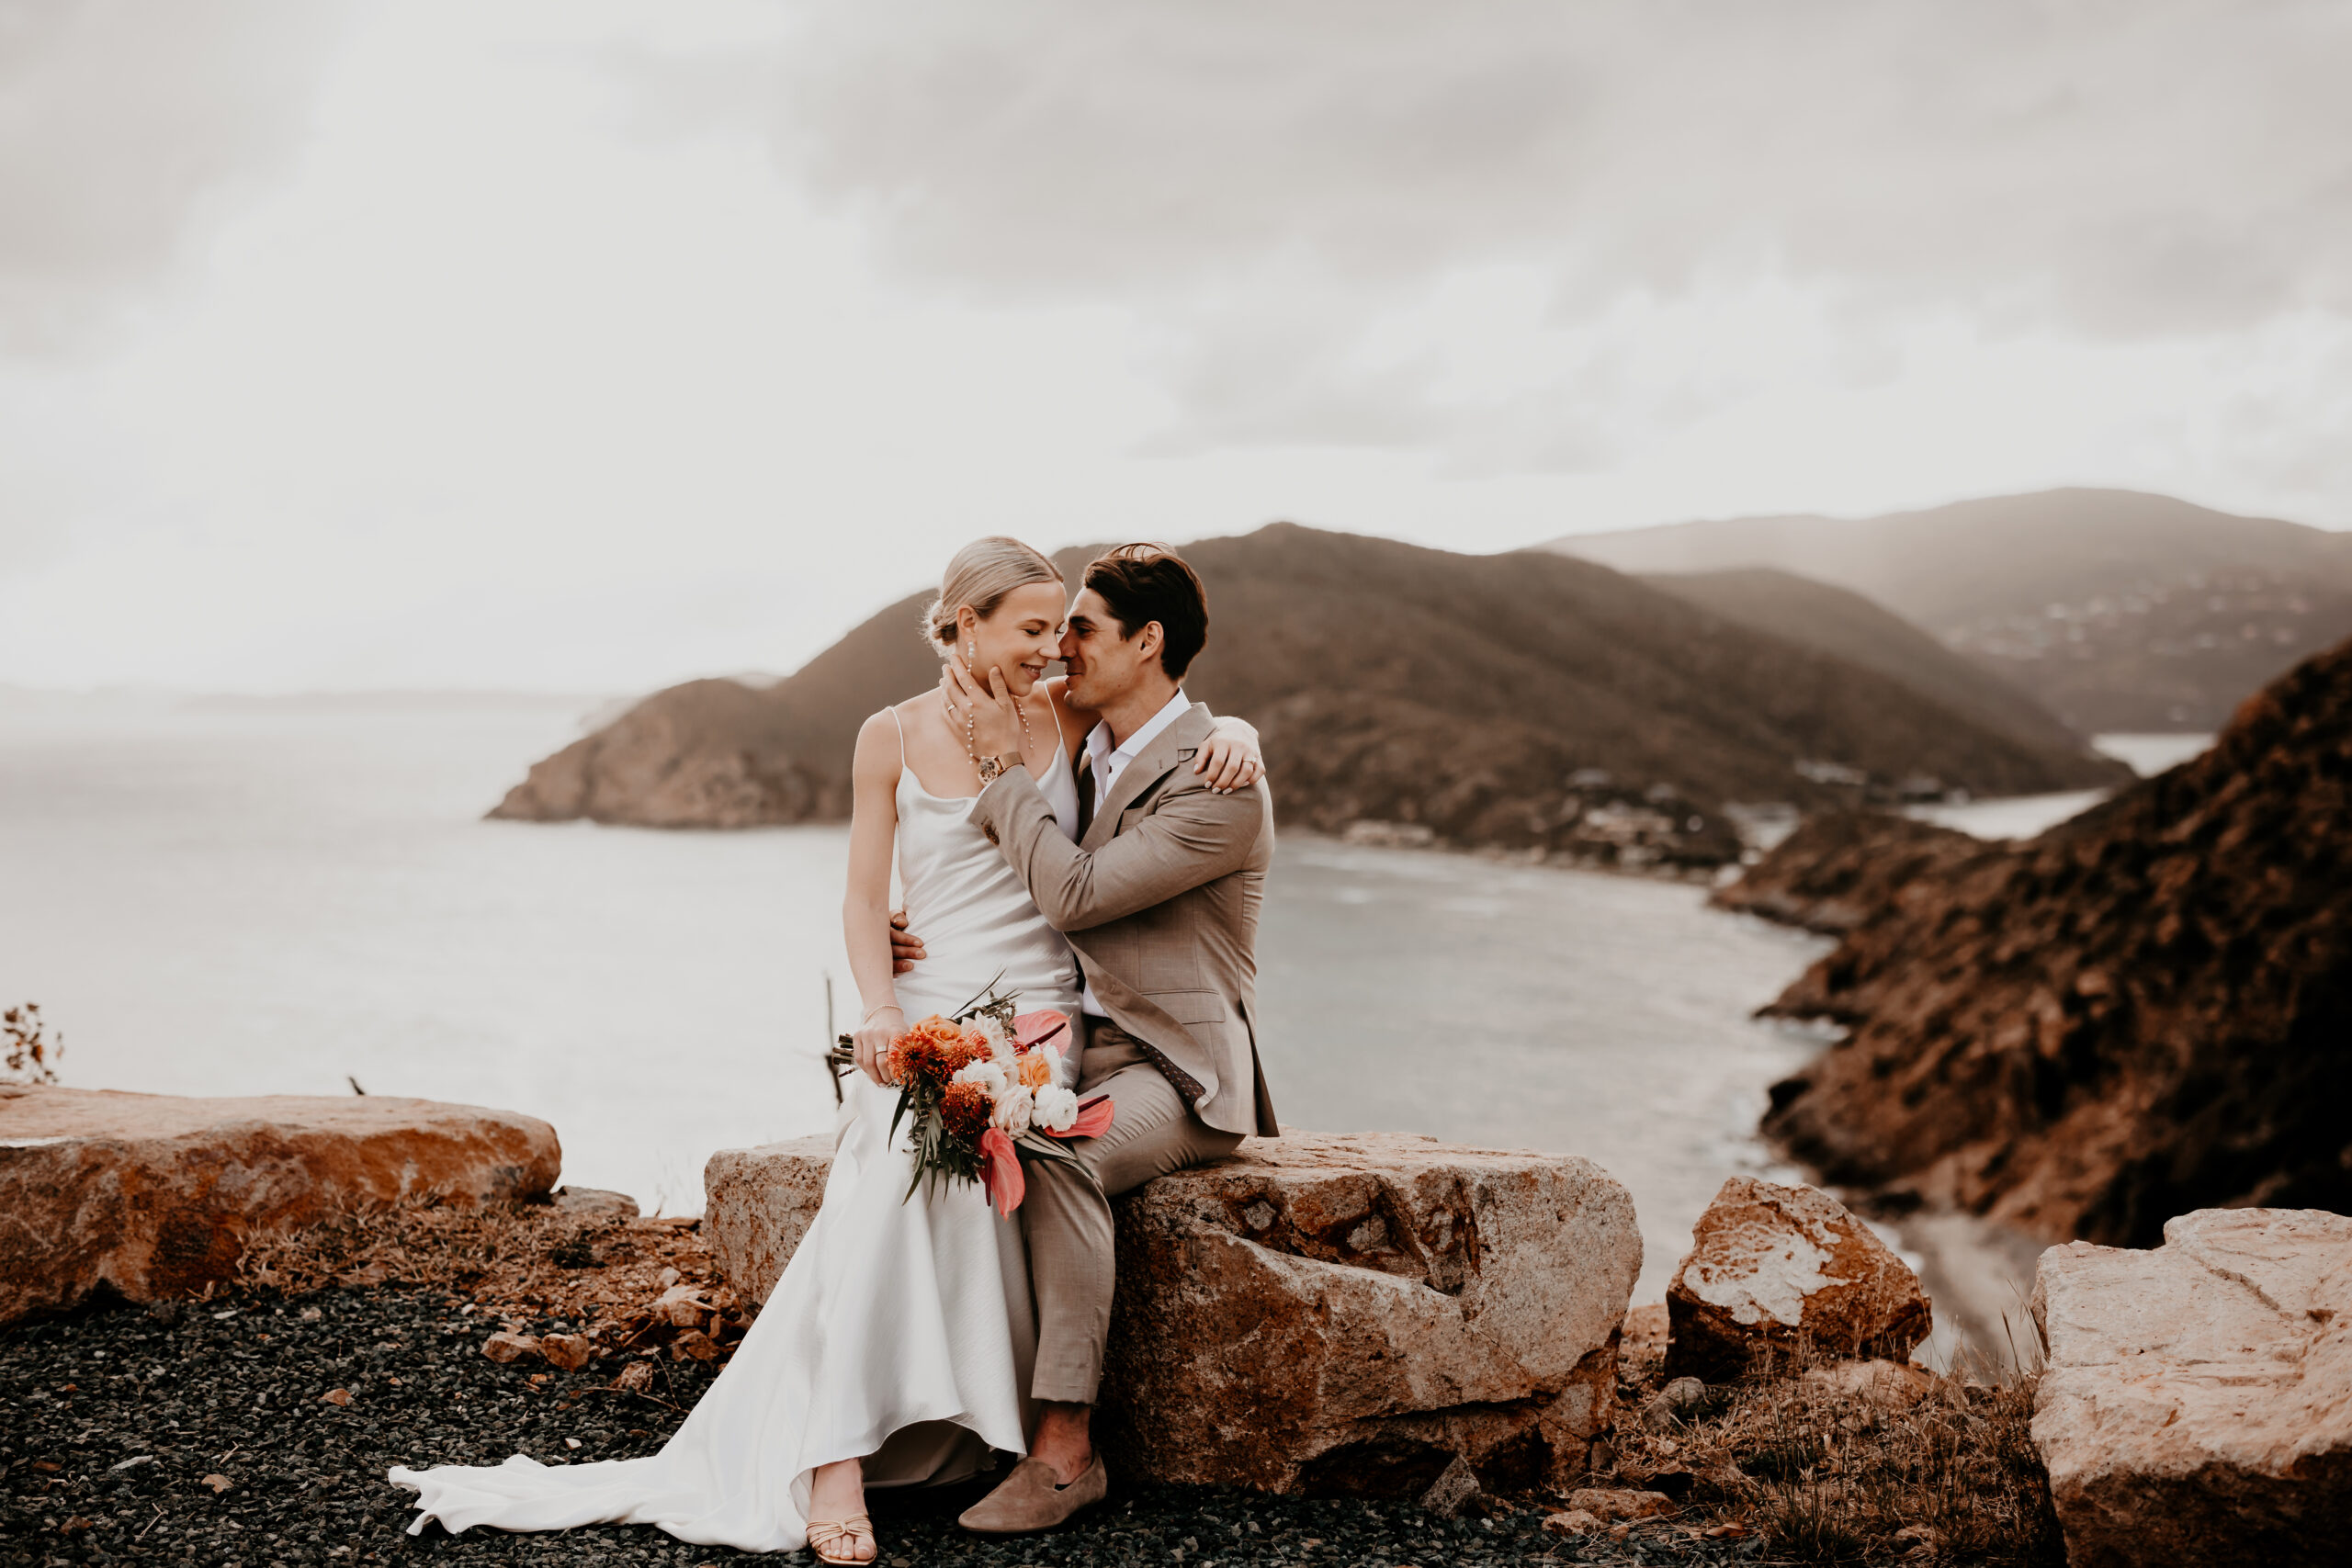 Exquisite luxury destination wedding set against the stunning backdrop of the British Virgin Islands' turquoise waters, featuring an elegantly decorated outdoor ceremony with a breathtaking view